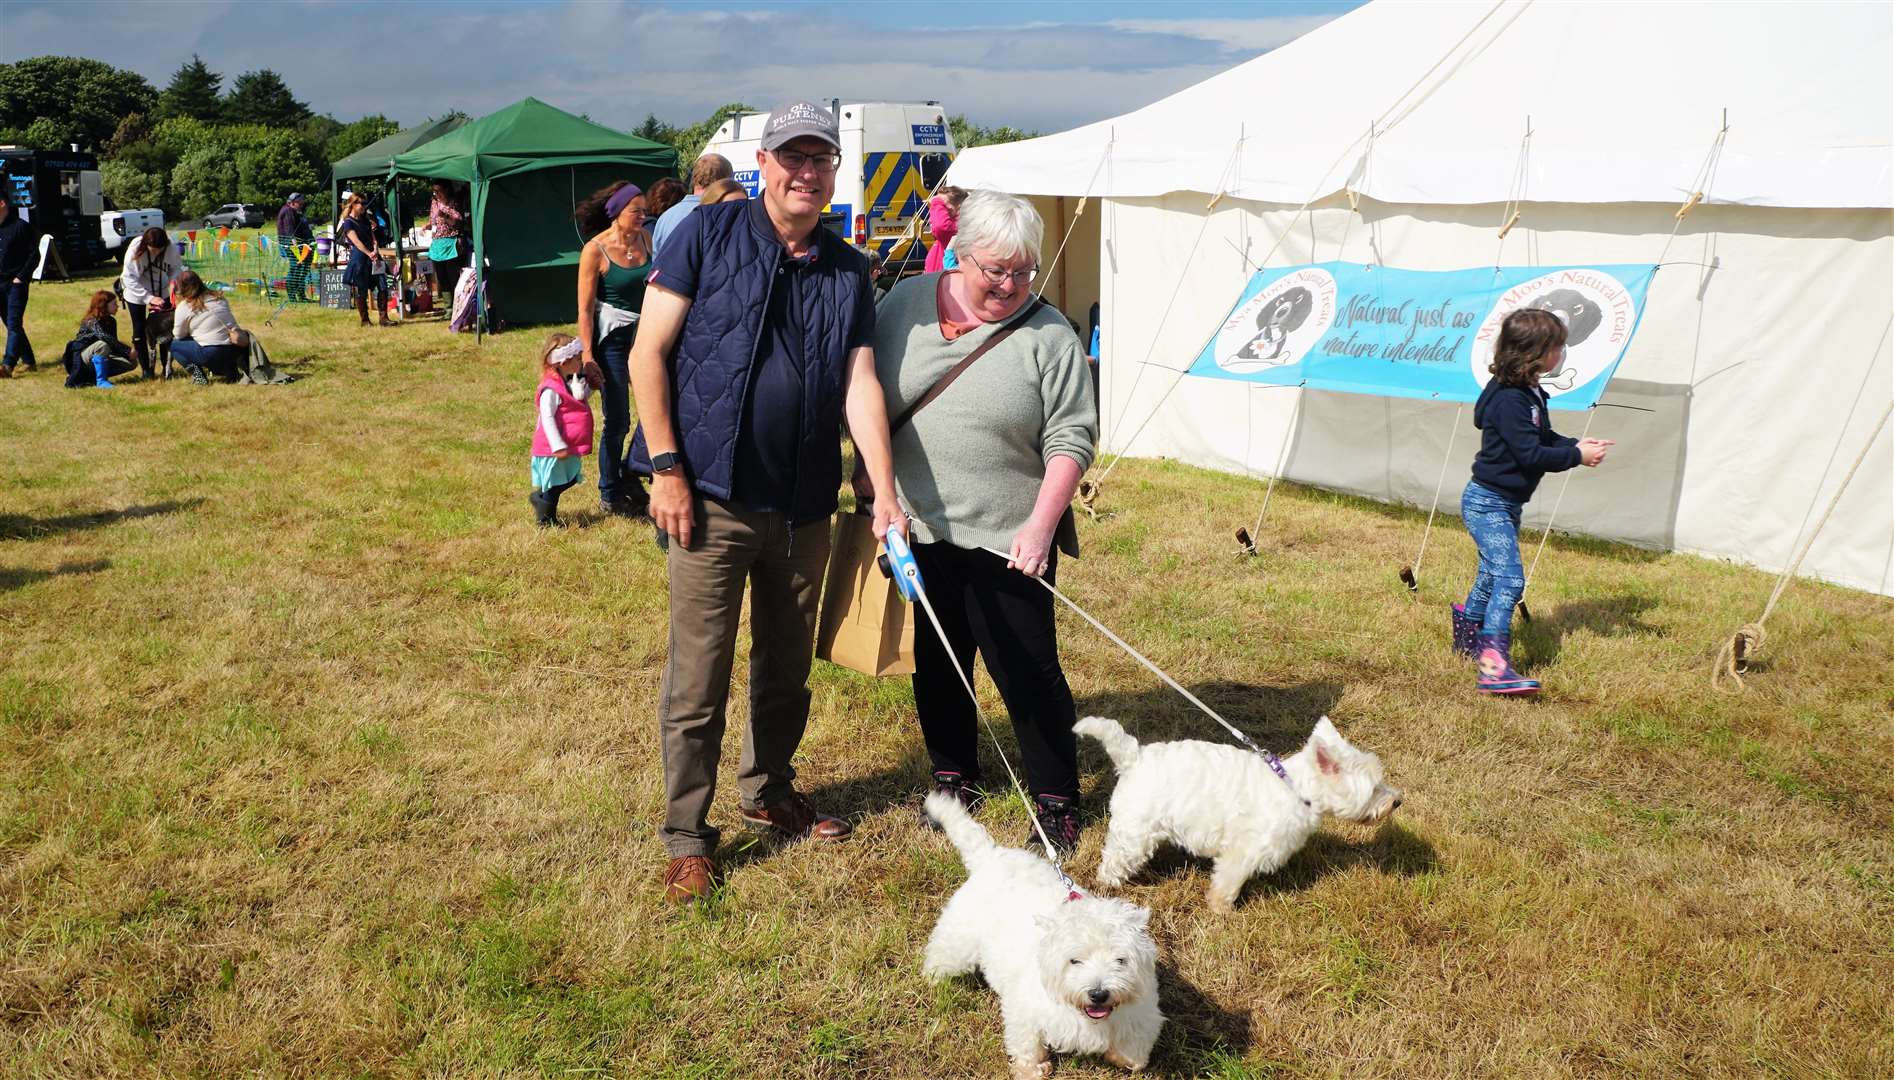 Mark and Carole Rouse enjoyed the day with their dogs and even found some special treats for them. Picture: DGS